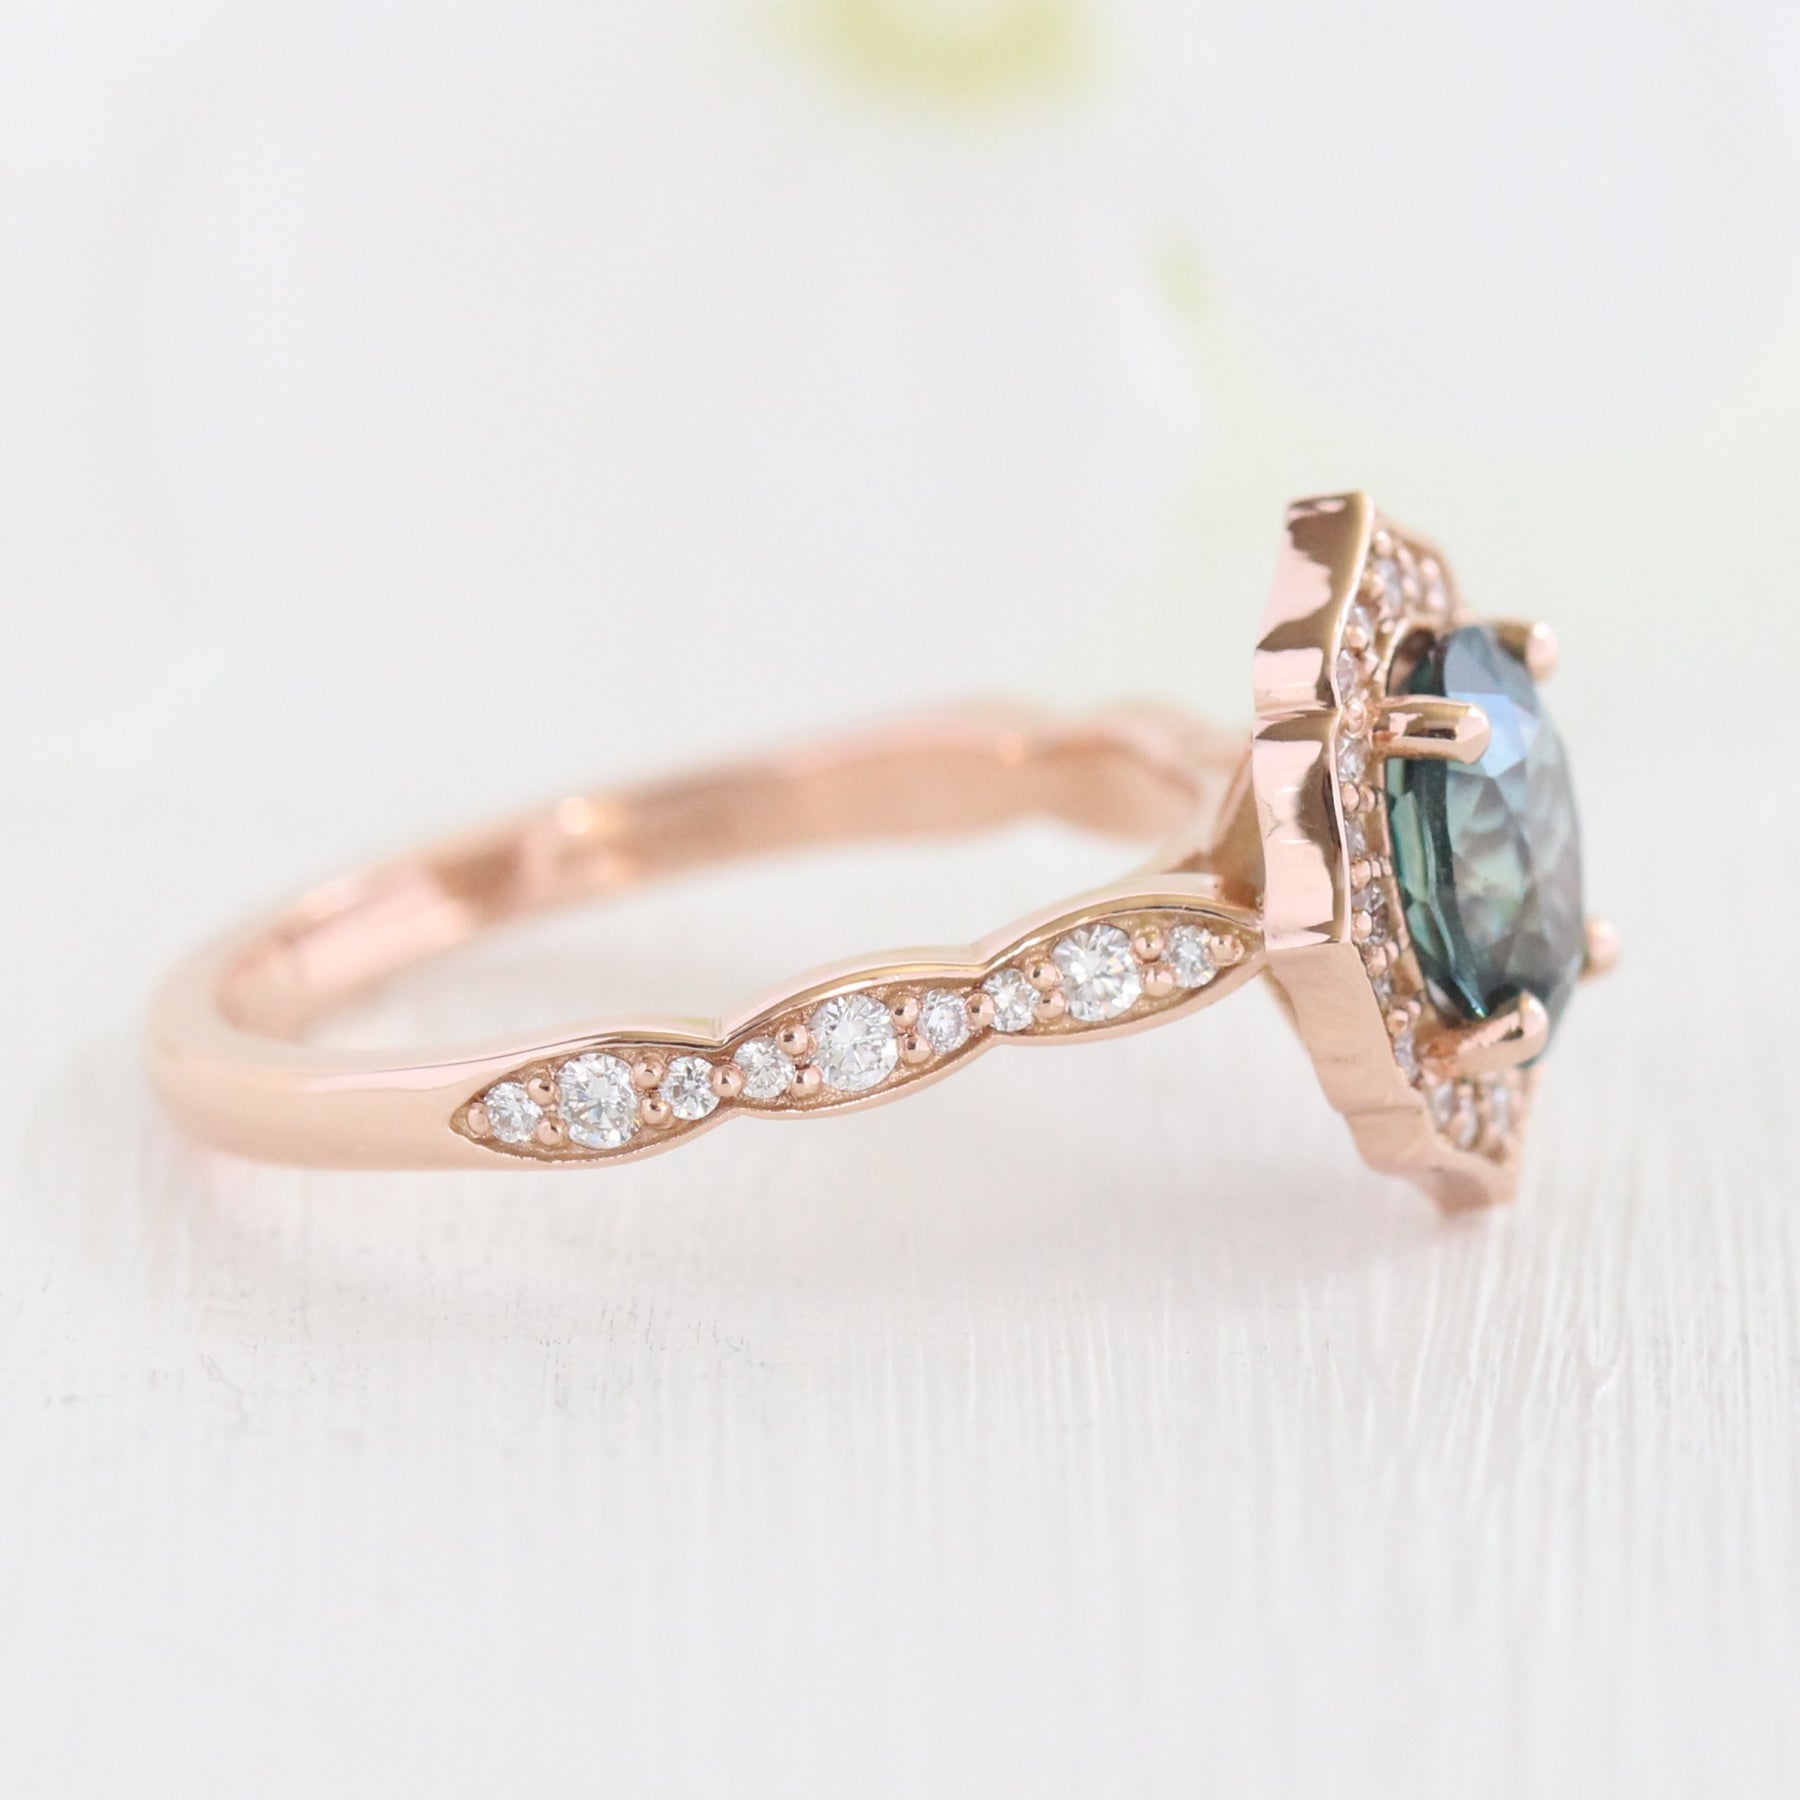 Teal Sapphire Ring Rose Gold Vintage Floral Diamond Engagement Ring La More Design Jewelry